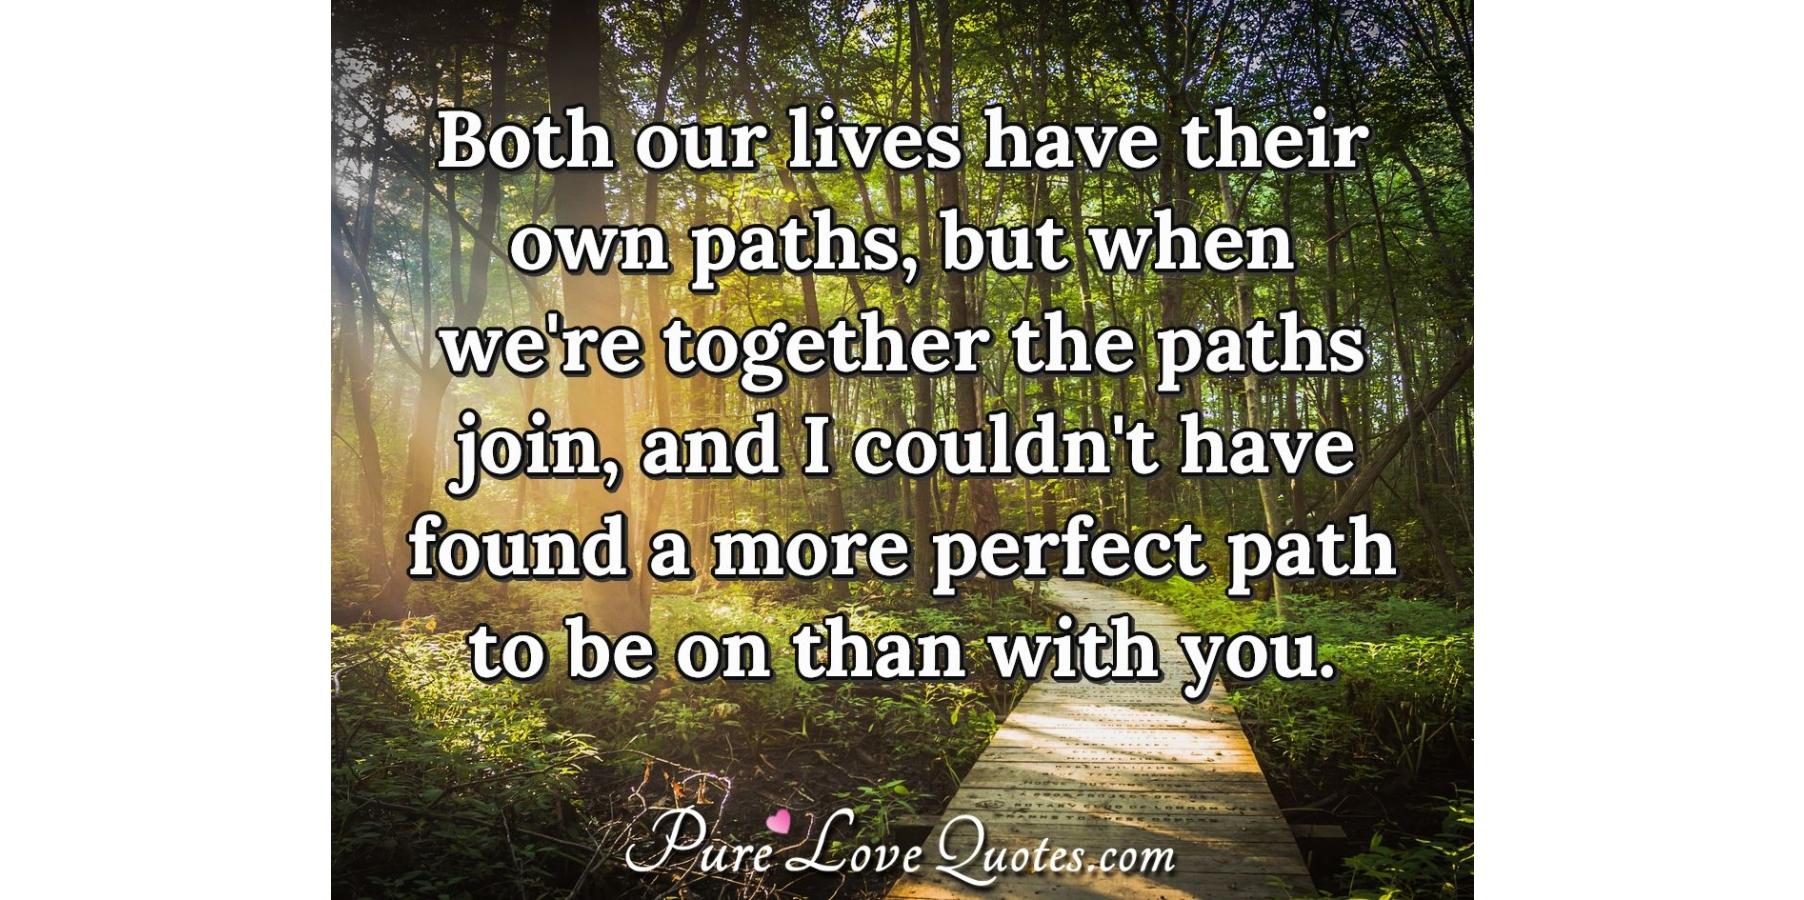 Both our lives have their own paths, but when we're together the paths